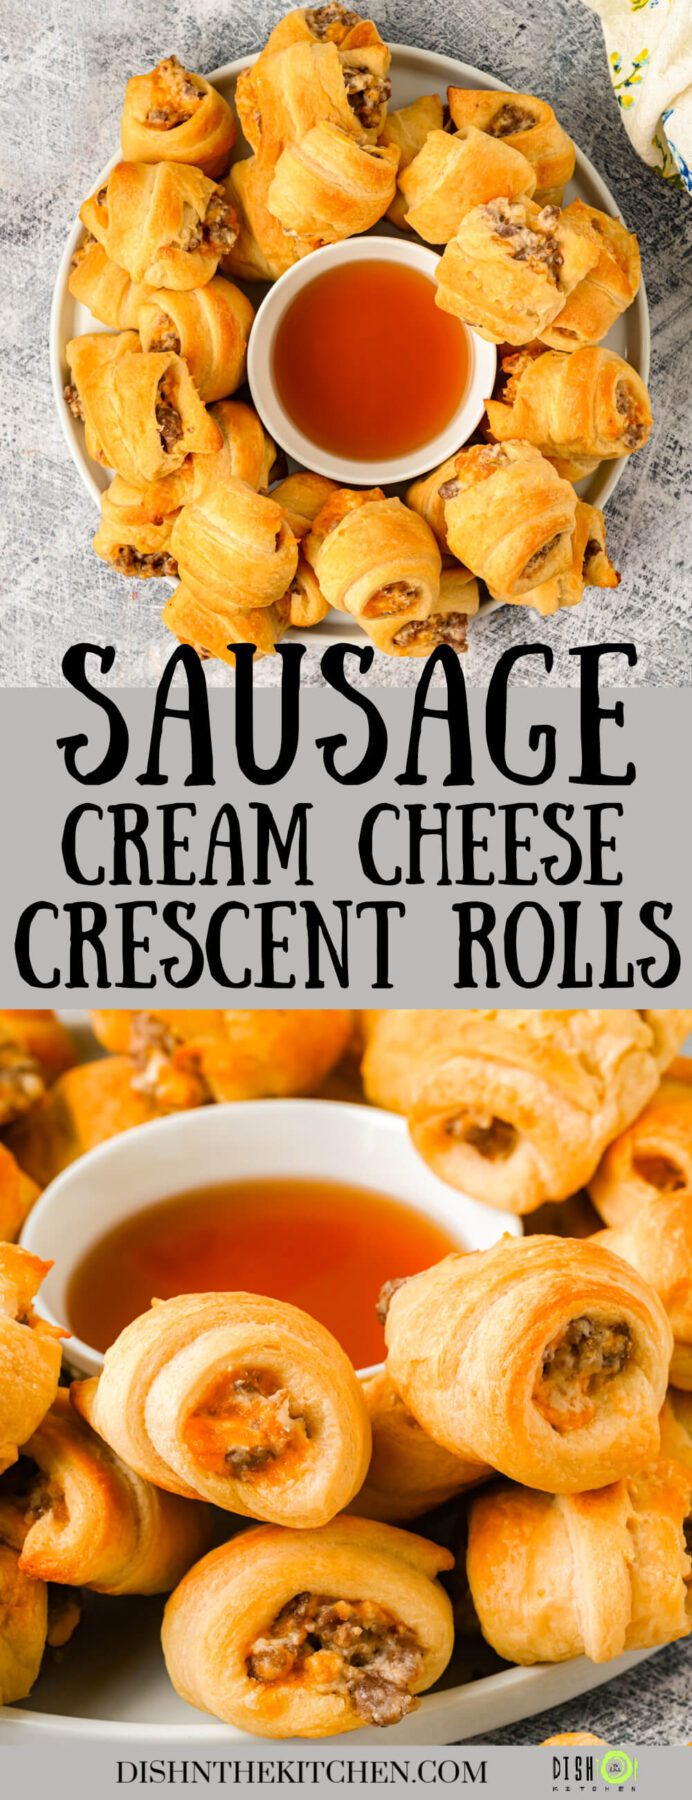 Pinterest image of a platter of golden baked Sausage Cream Cheese Crescent Rolls surrounding a bowl of dipping sauce.